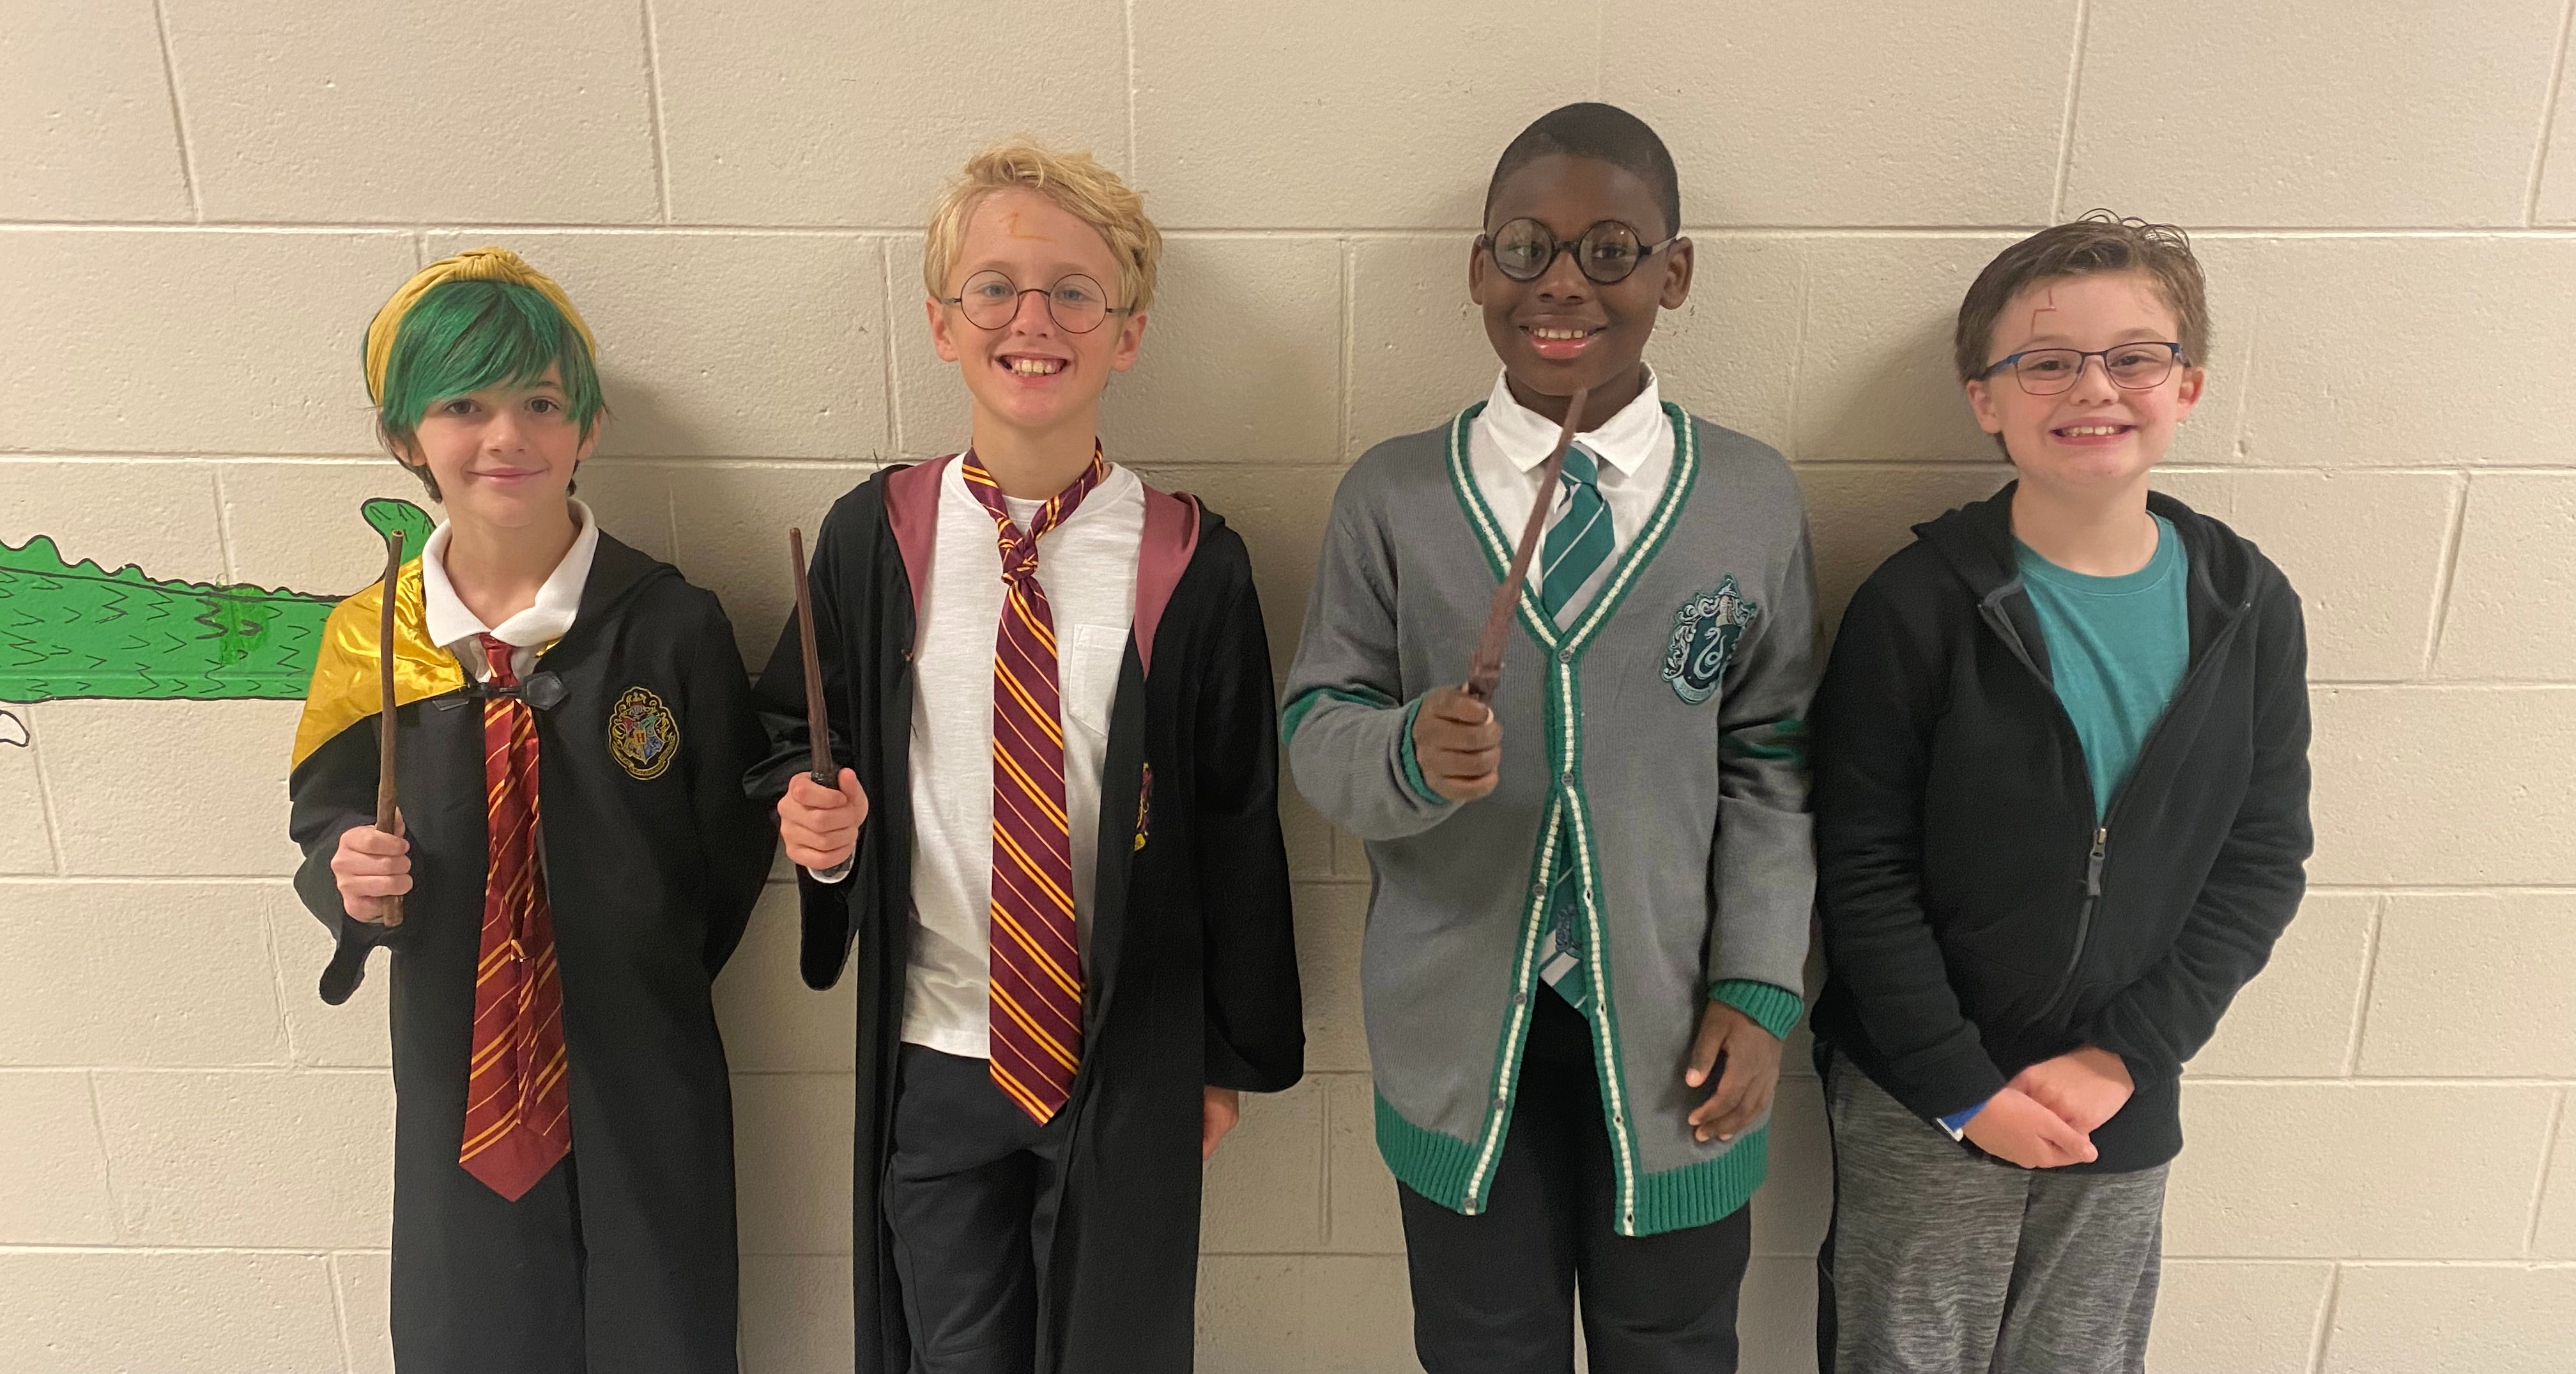 Four students dressed up in Harry Potter attire